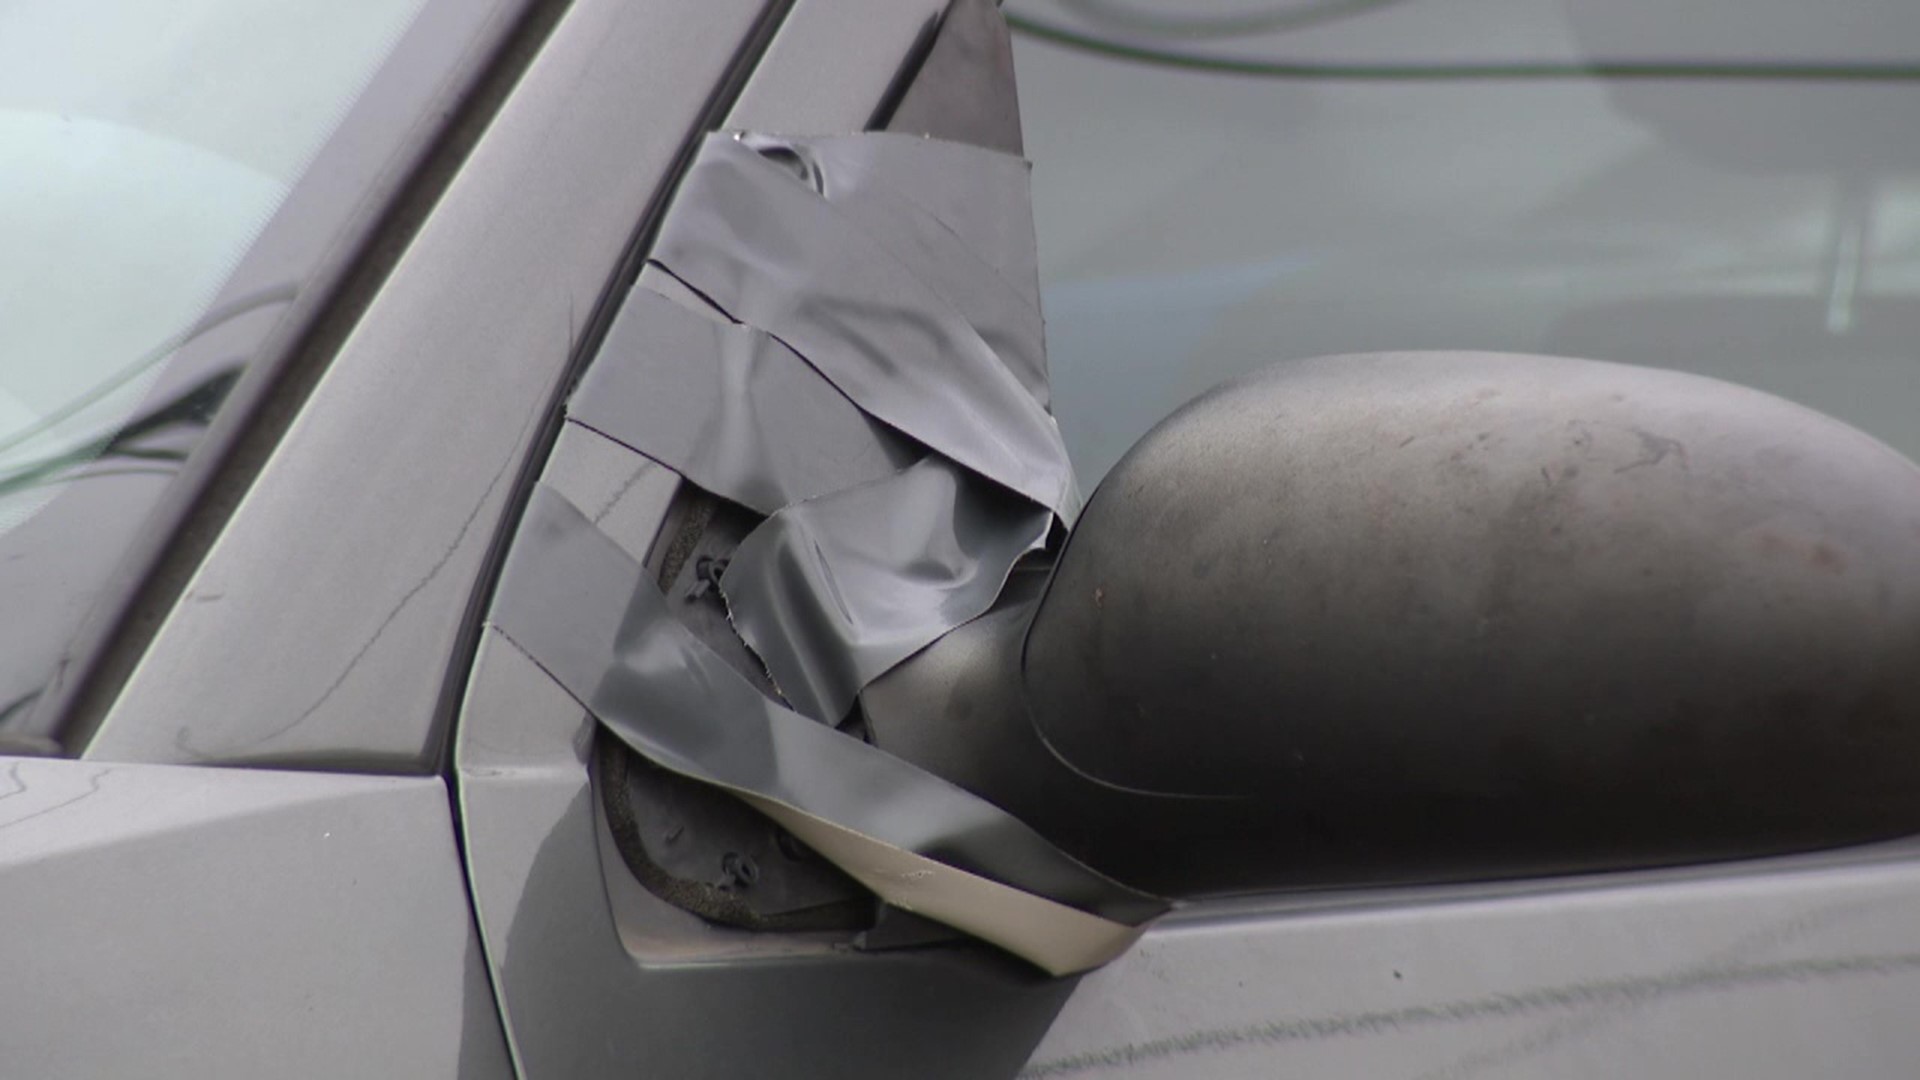 Officers found damage to over a dozen cars, side mirrors, front windows, and the body of the vehicles.